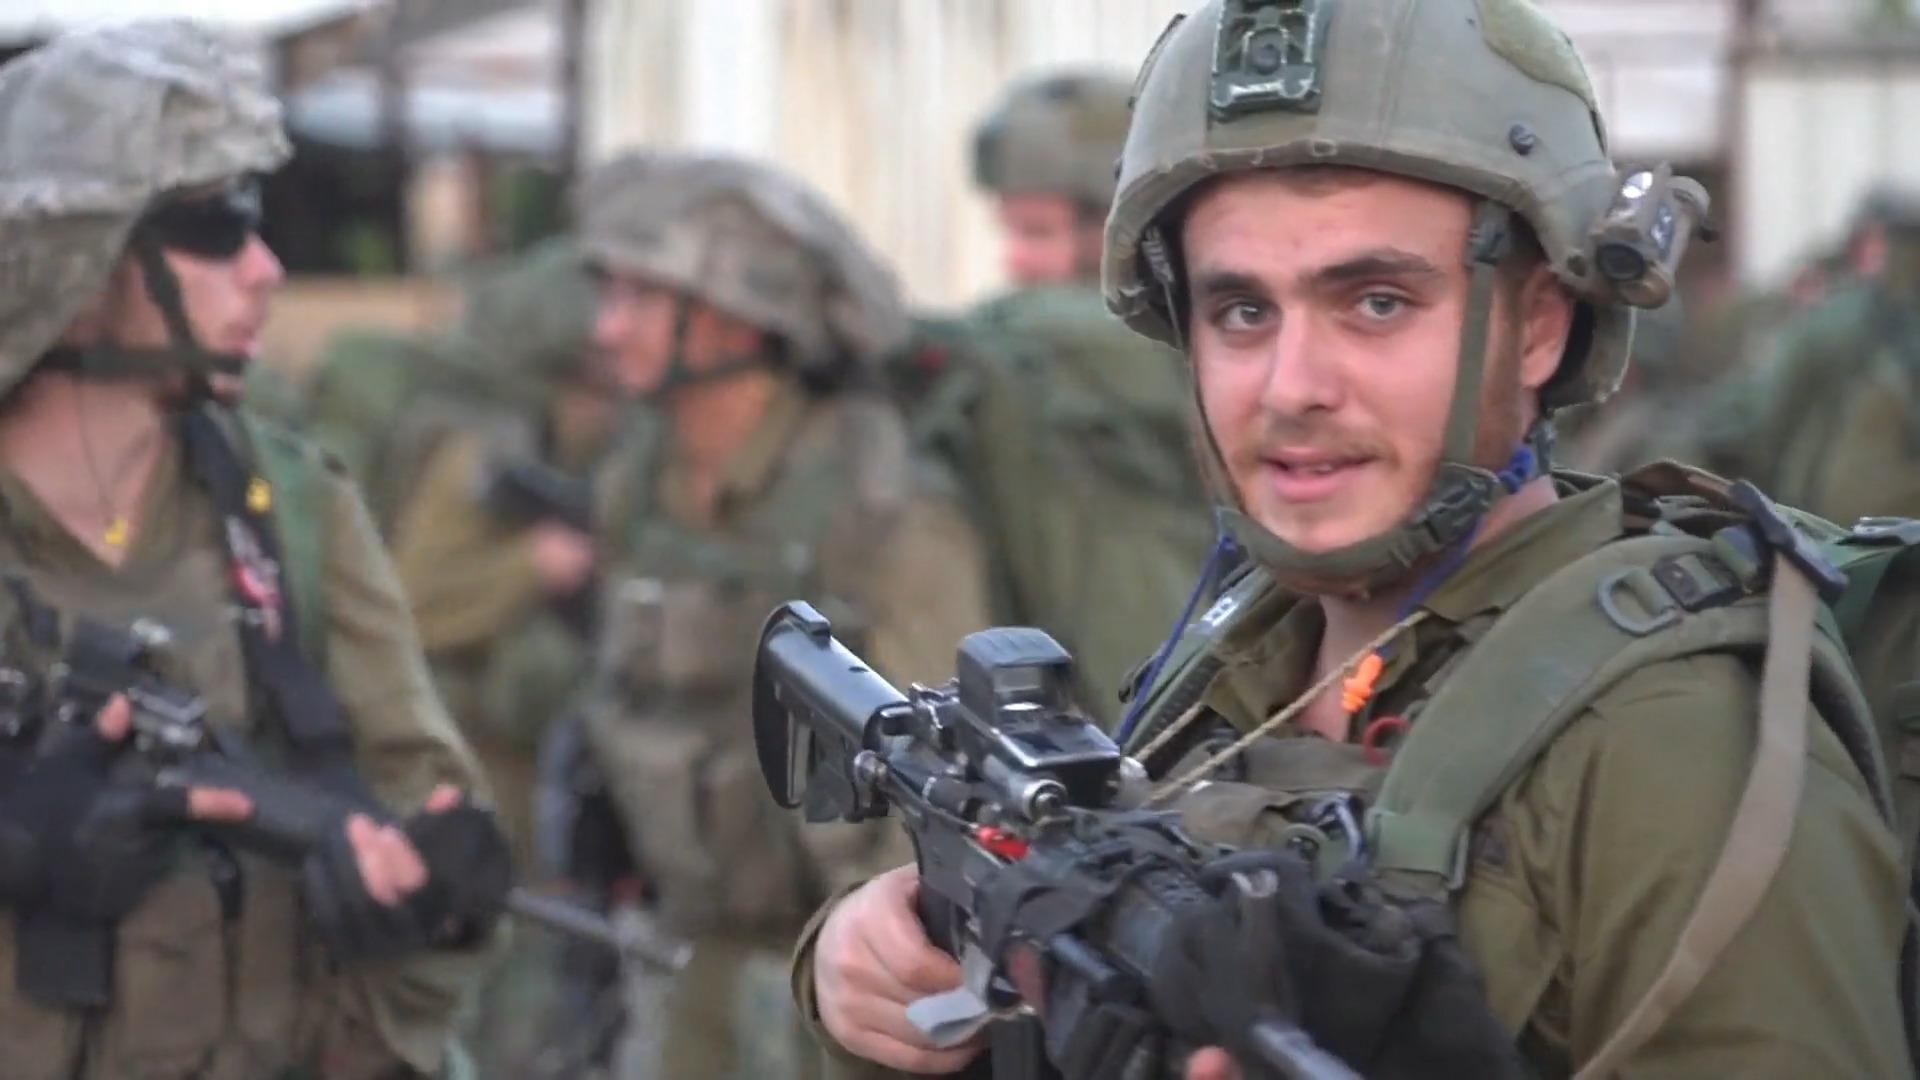 Israel prepares for ground offensive How harsh will Israel's military response be?